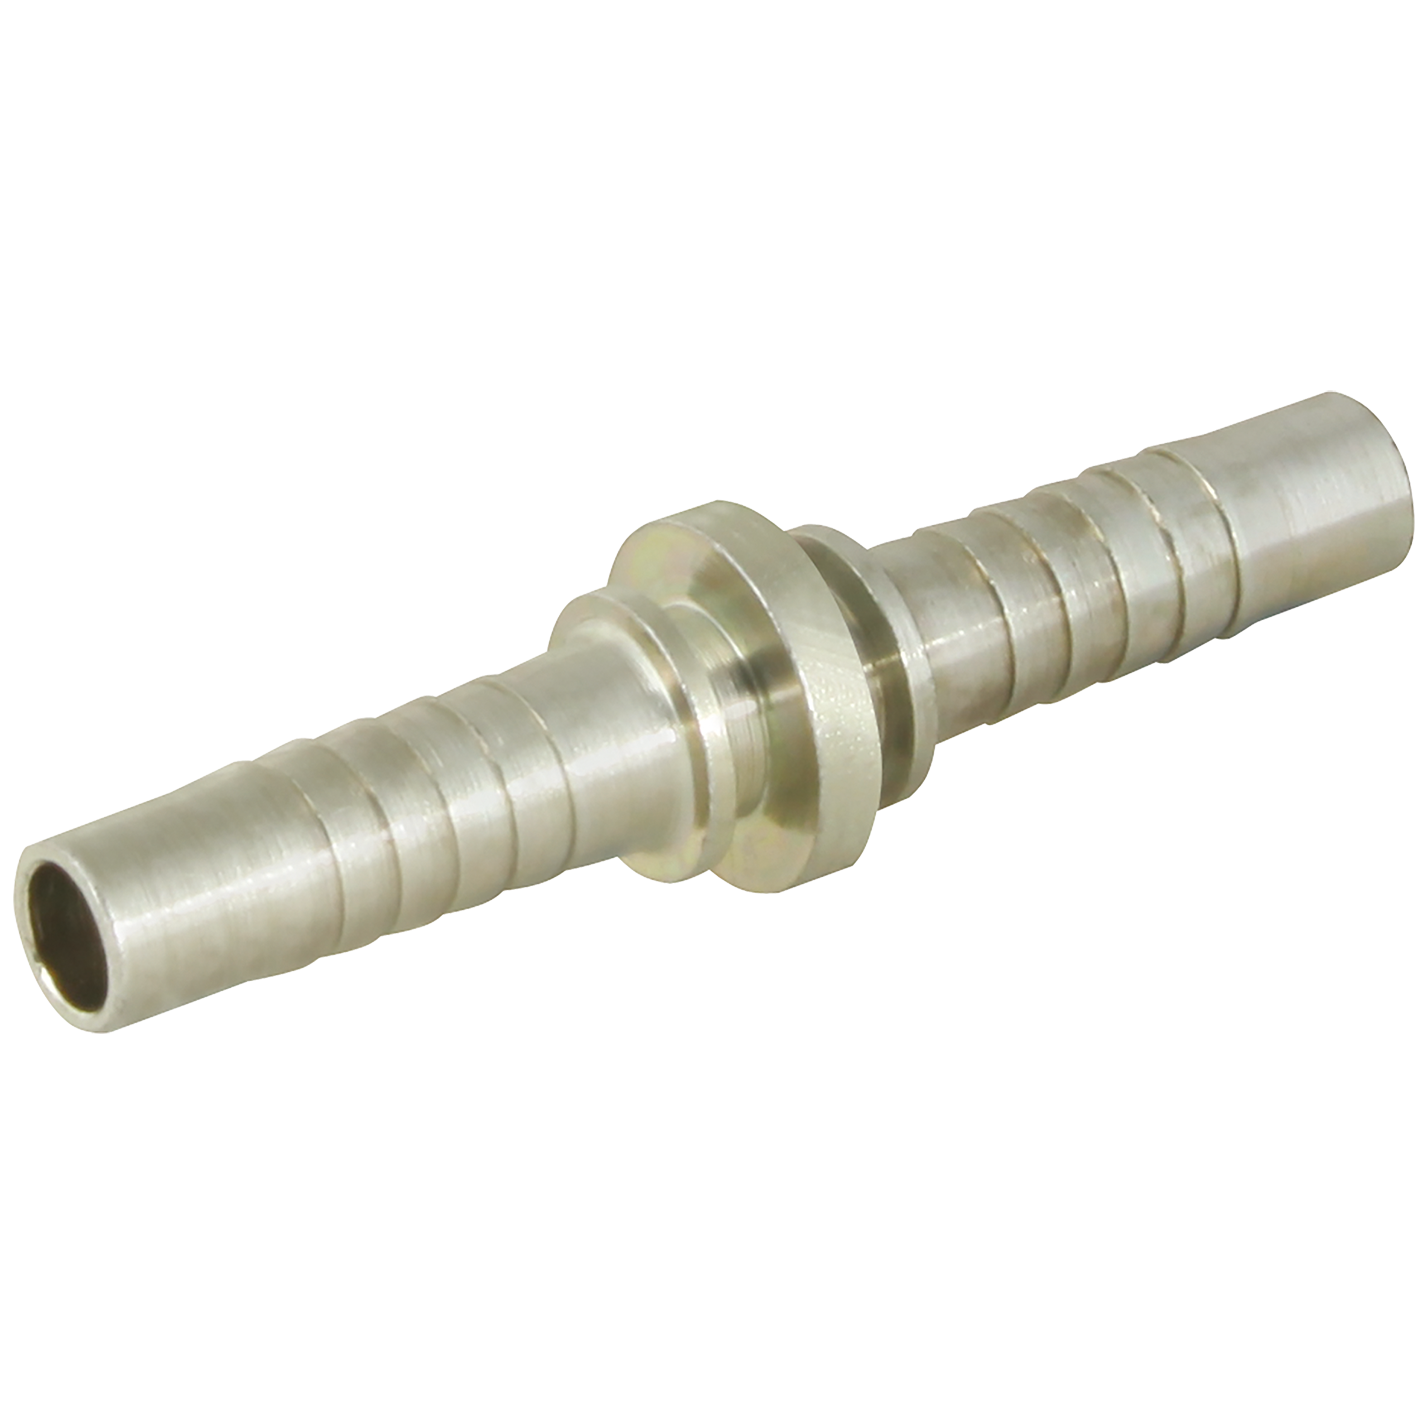 5/16" HOSE JOINT